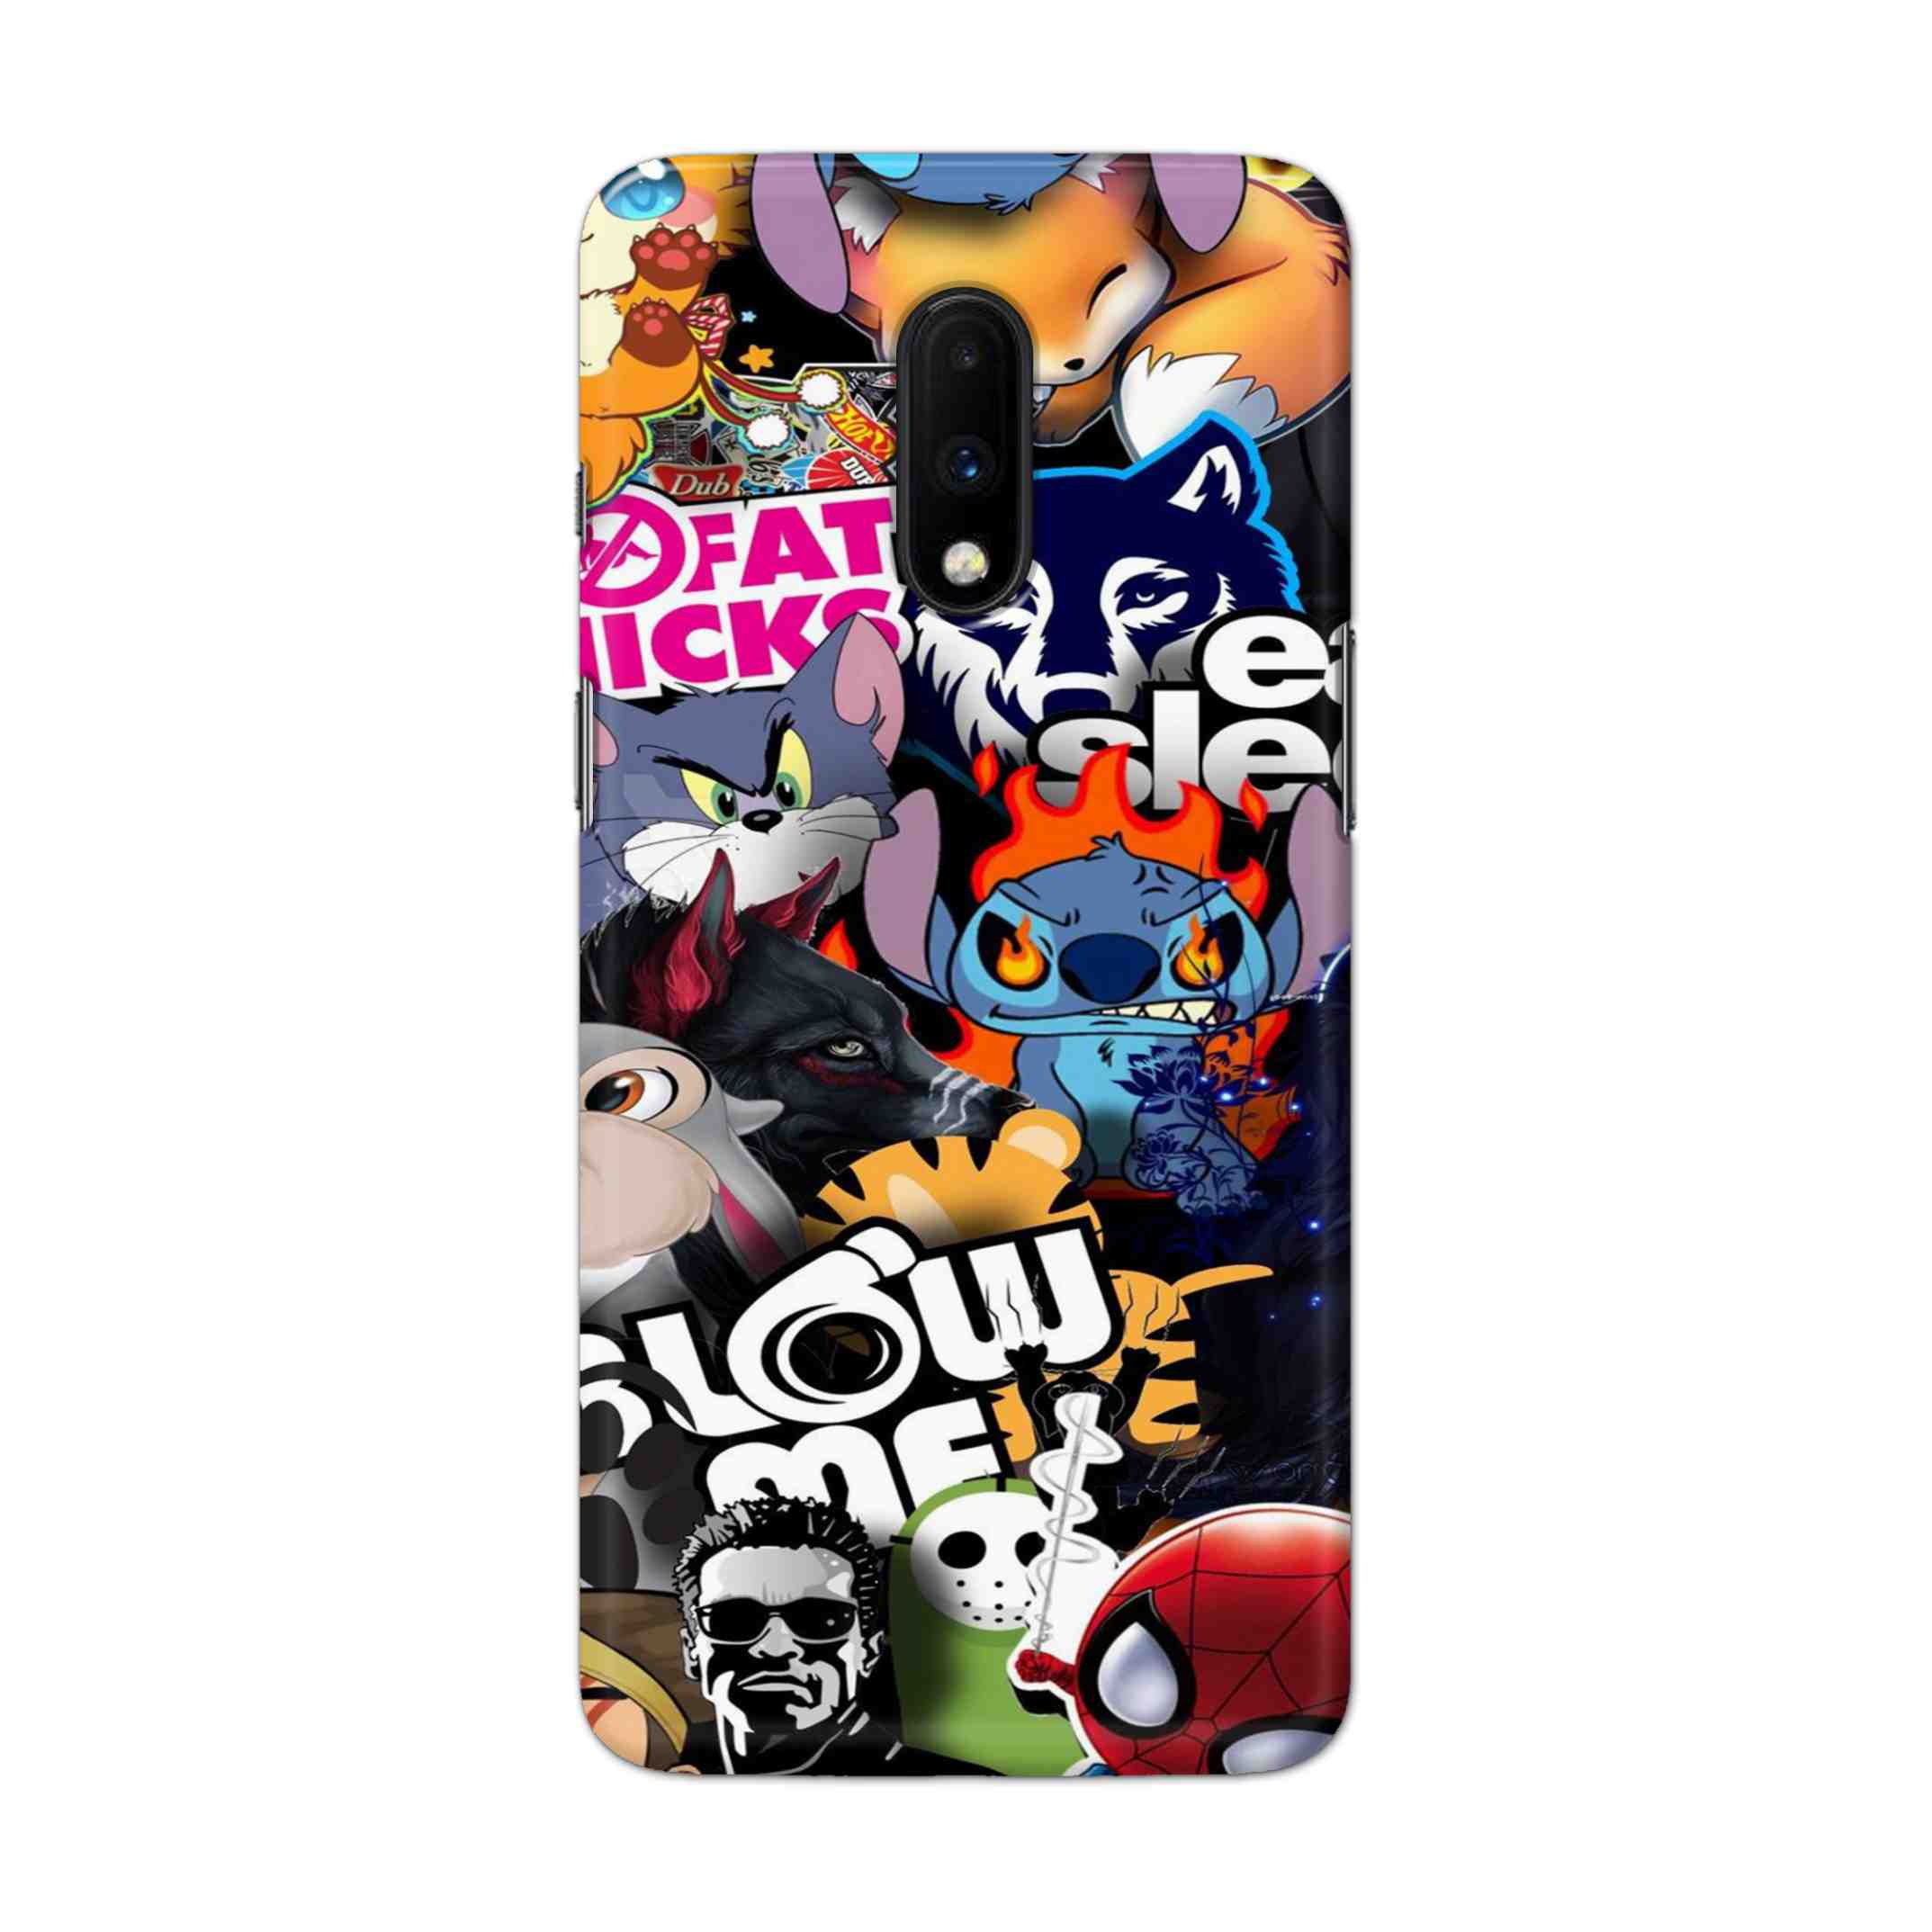 Buy Blow Me Hard Back Mobile Phone Case Cover For OnePlus 7 Online